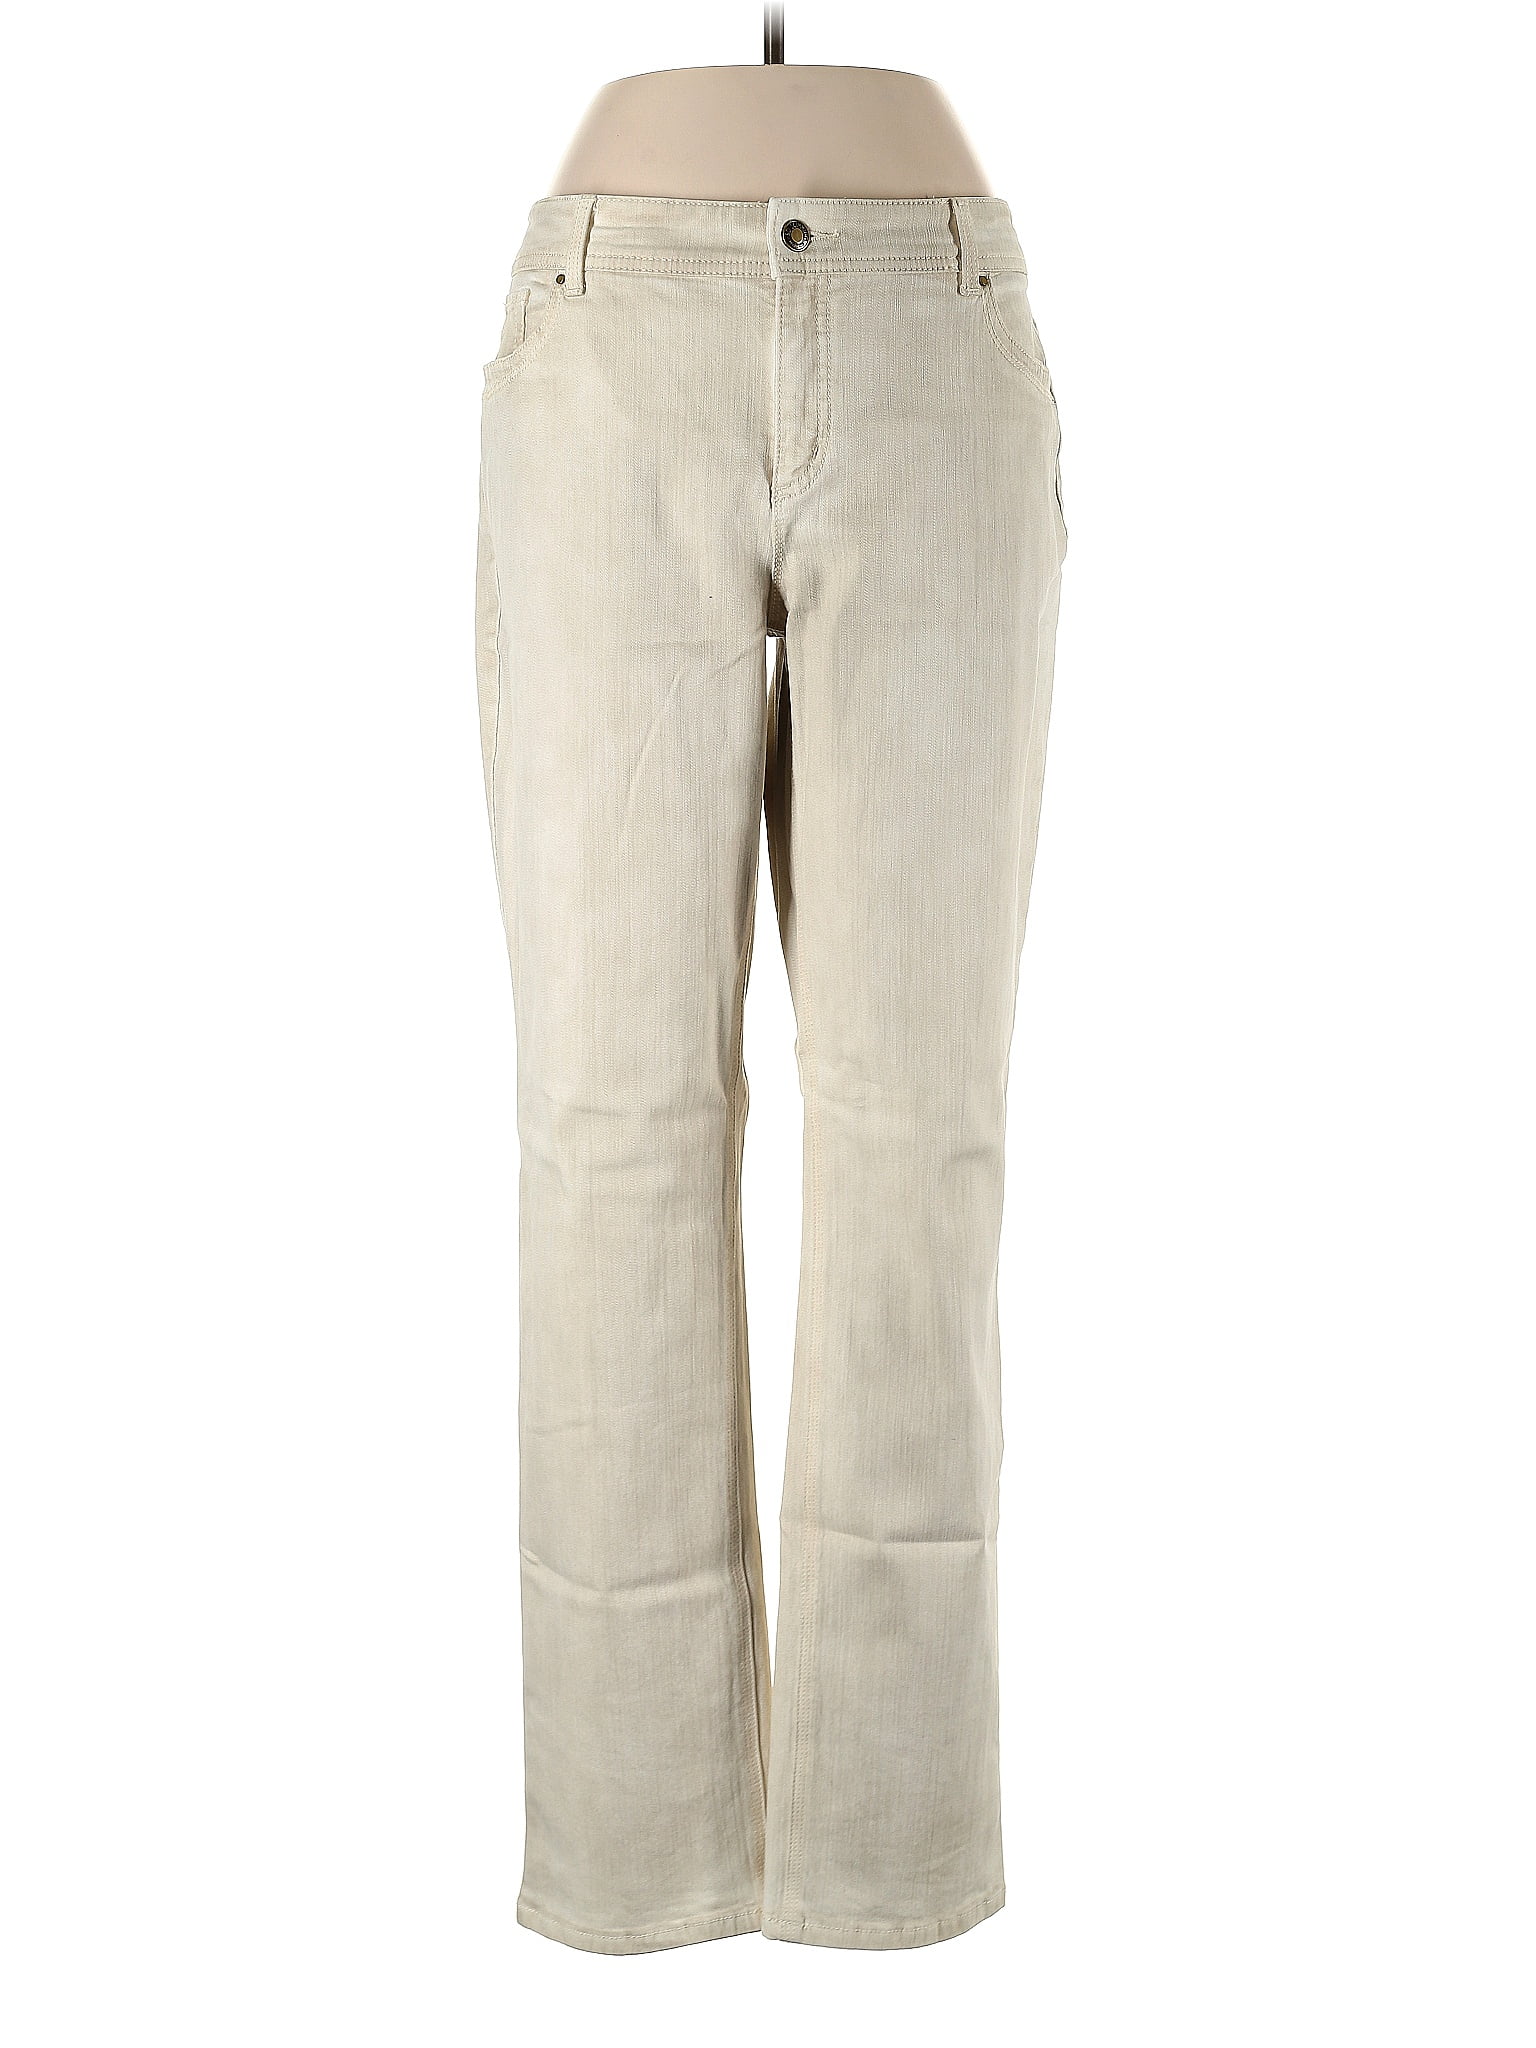 So Slimming by Chico's Solid Tan Casual Pants Size Lg (2) - 75% off